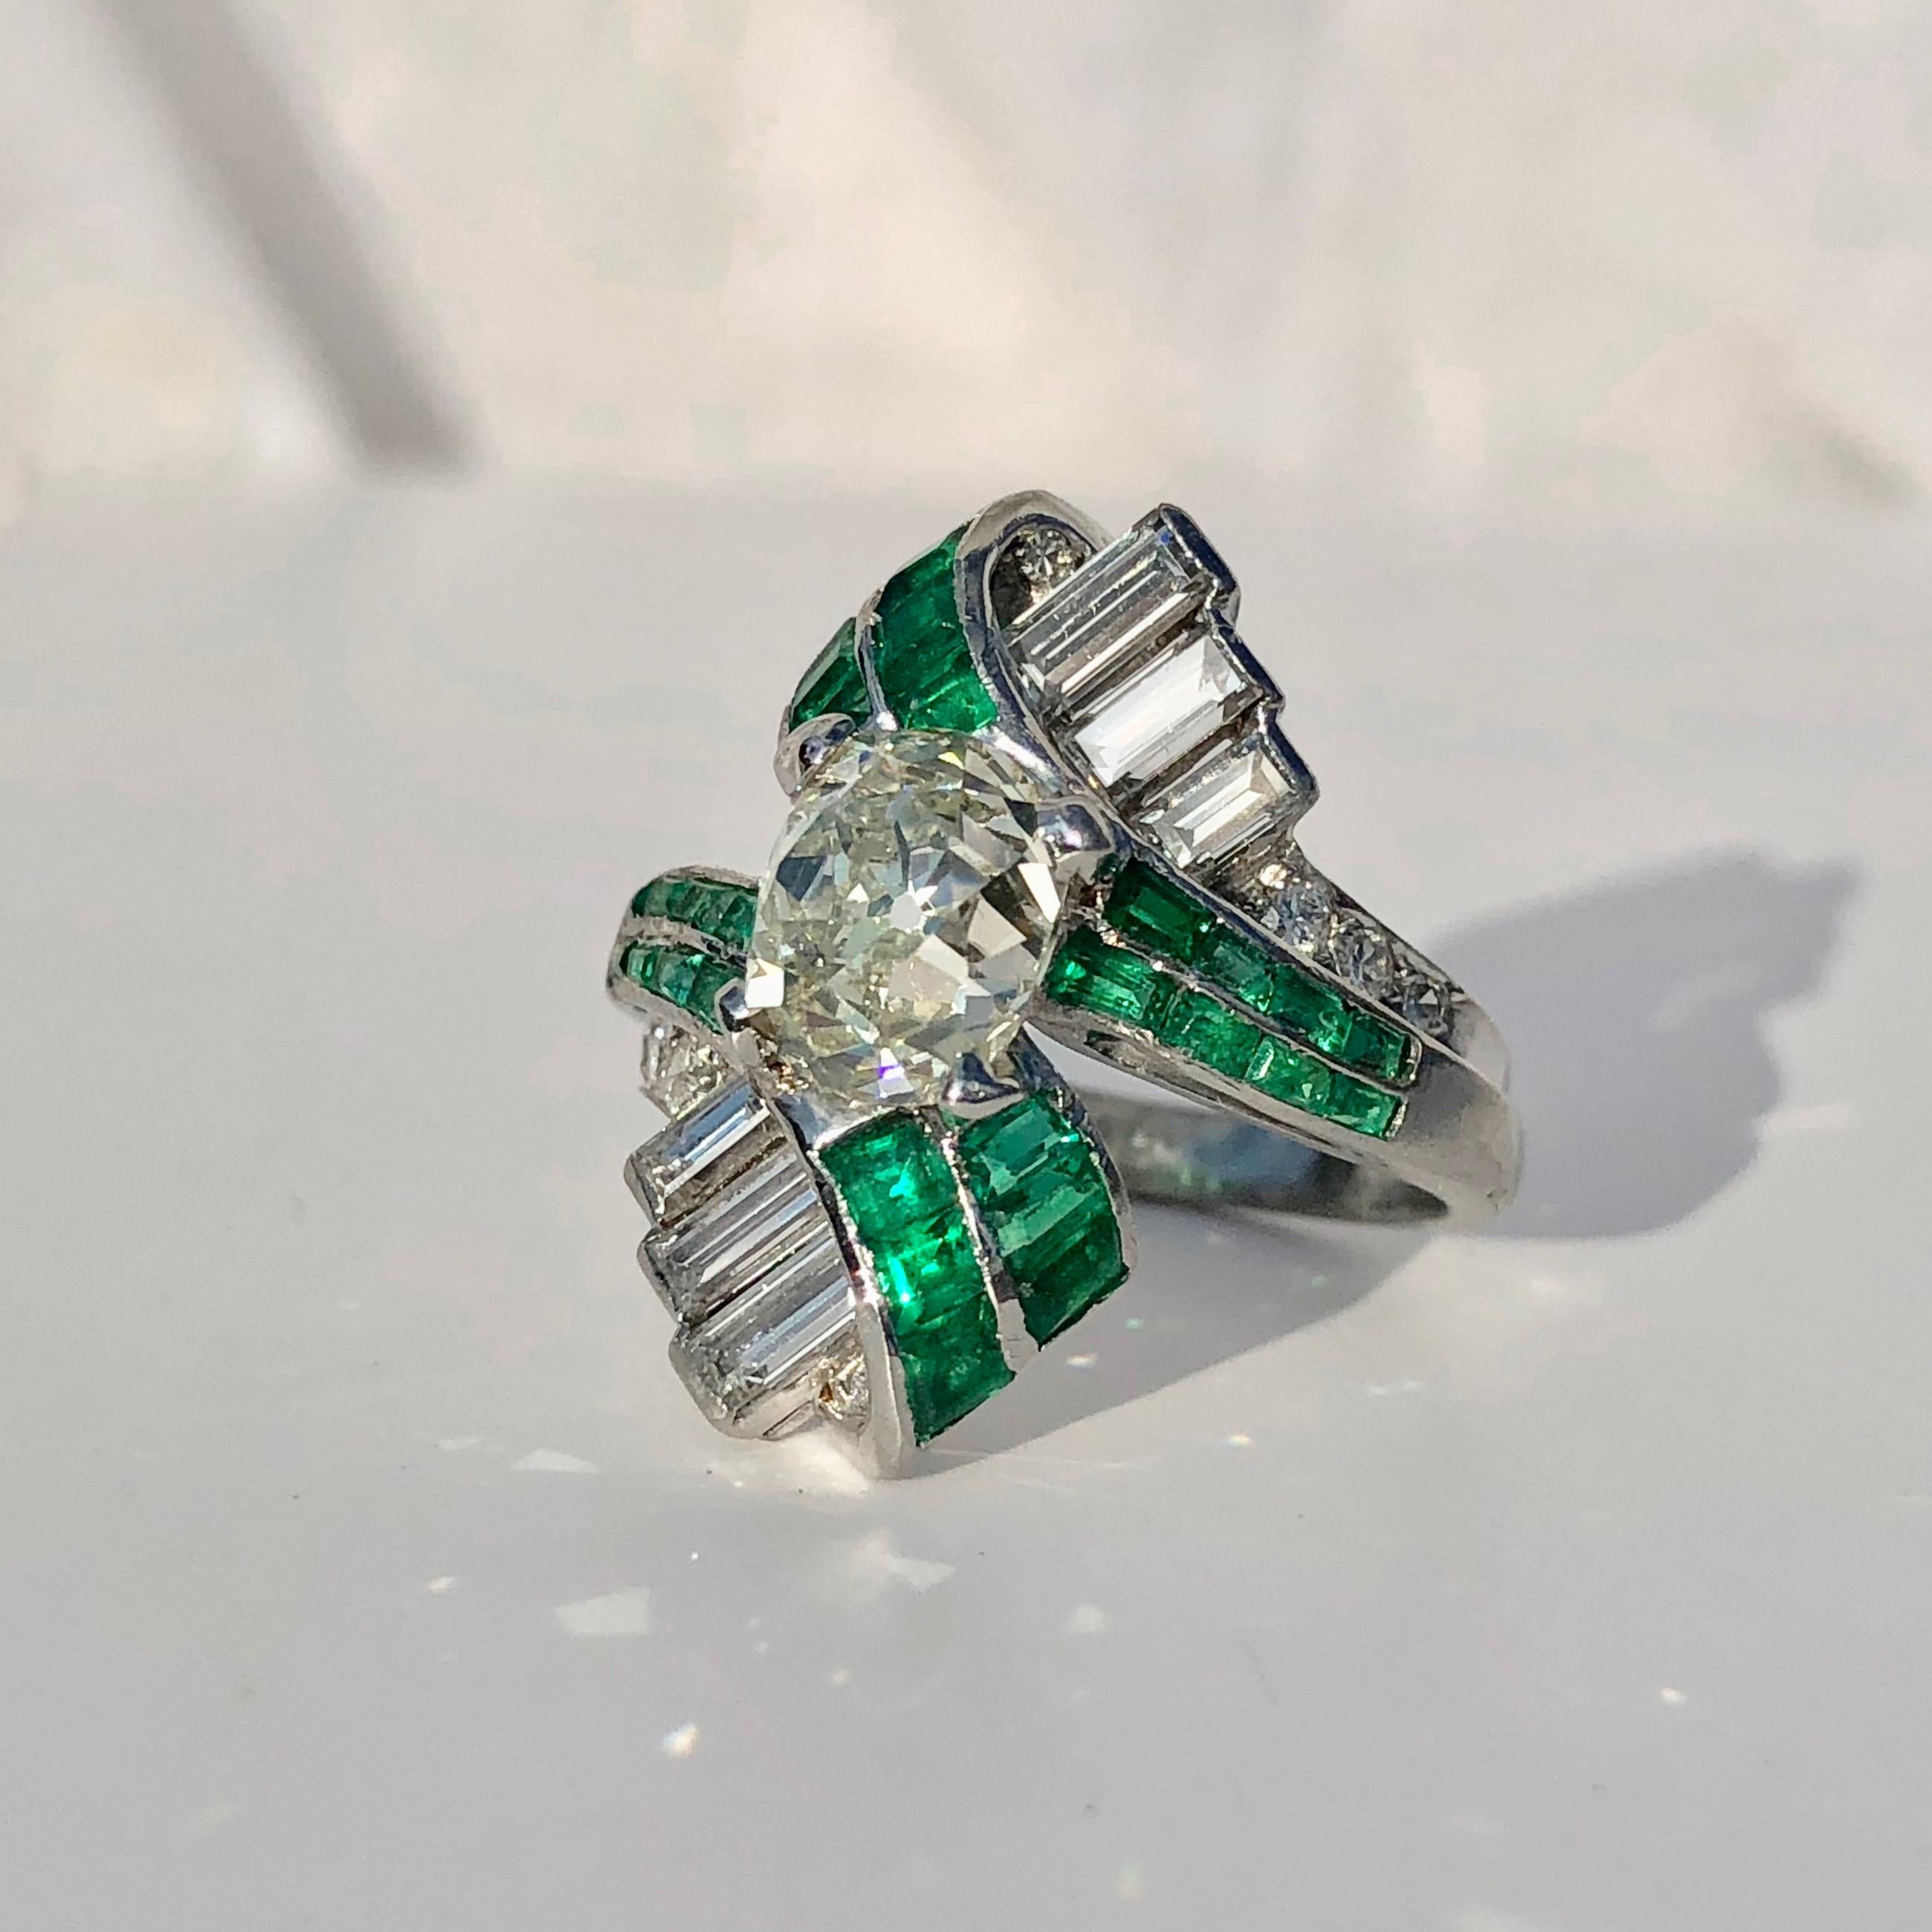 Antique Baguette Emerald And Old Cut Diamond Art Deco Cocktail Engagement Ring  im Angebot 1